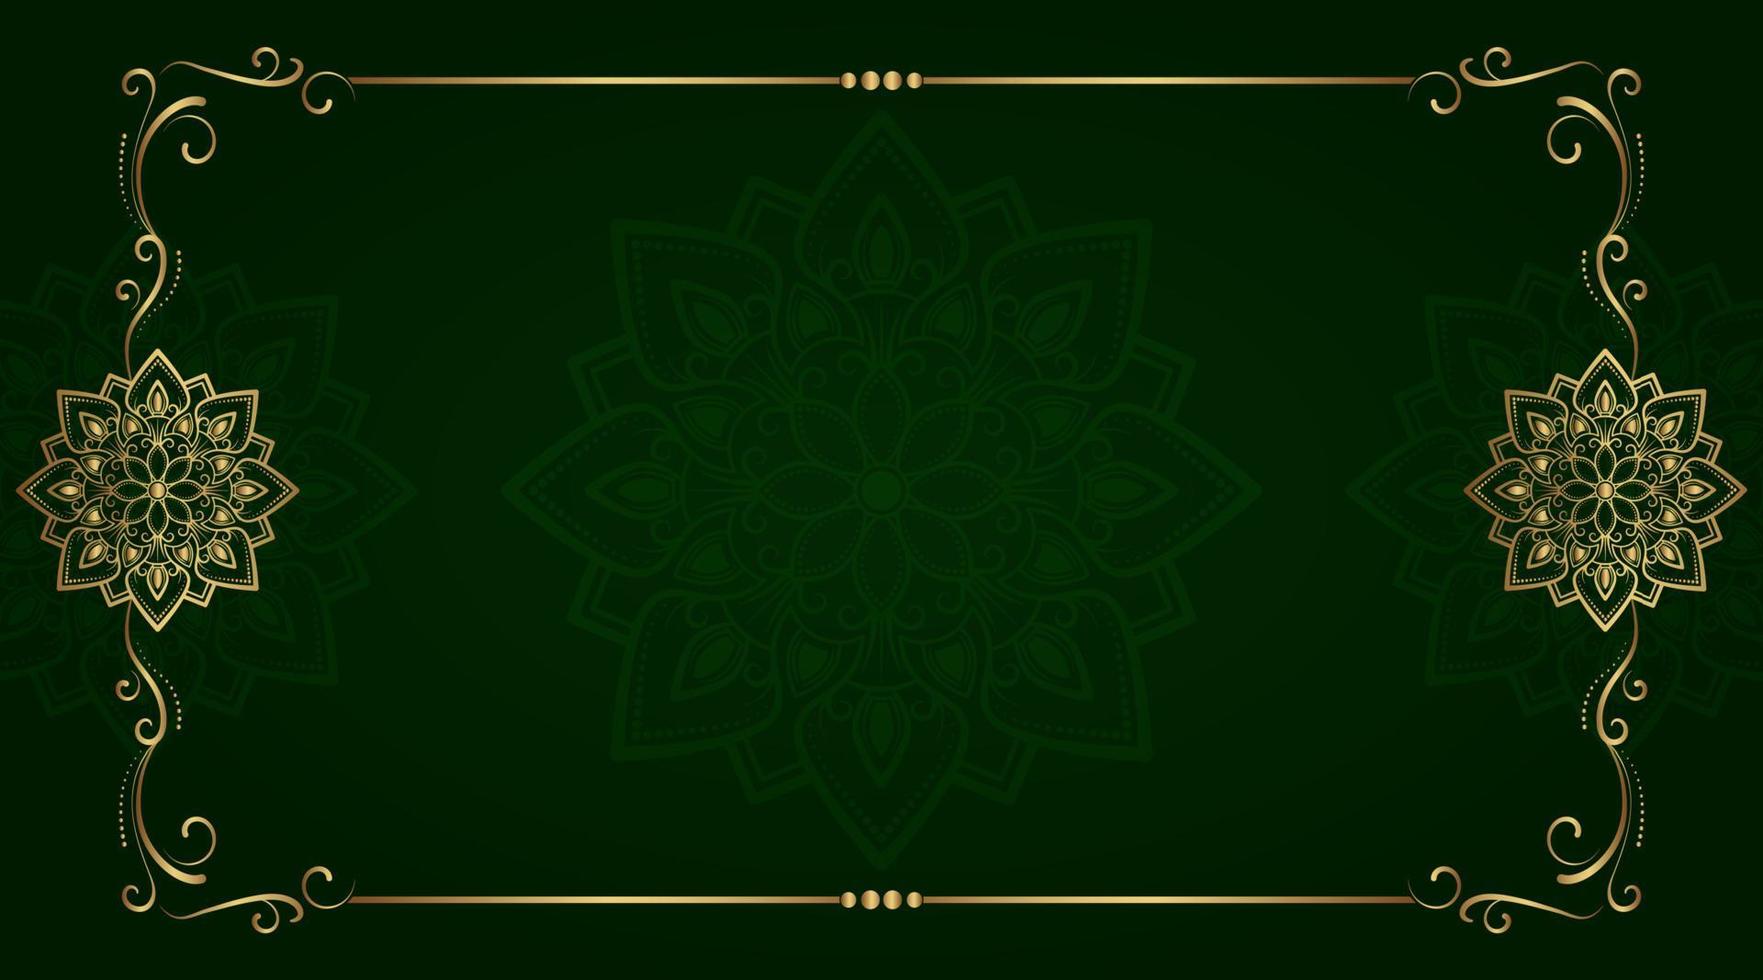 green and gold, luxury mandala background vector